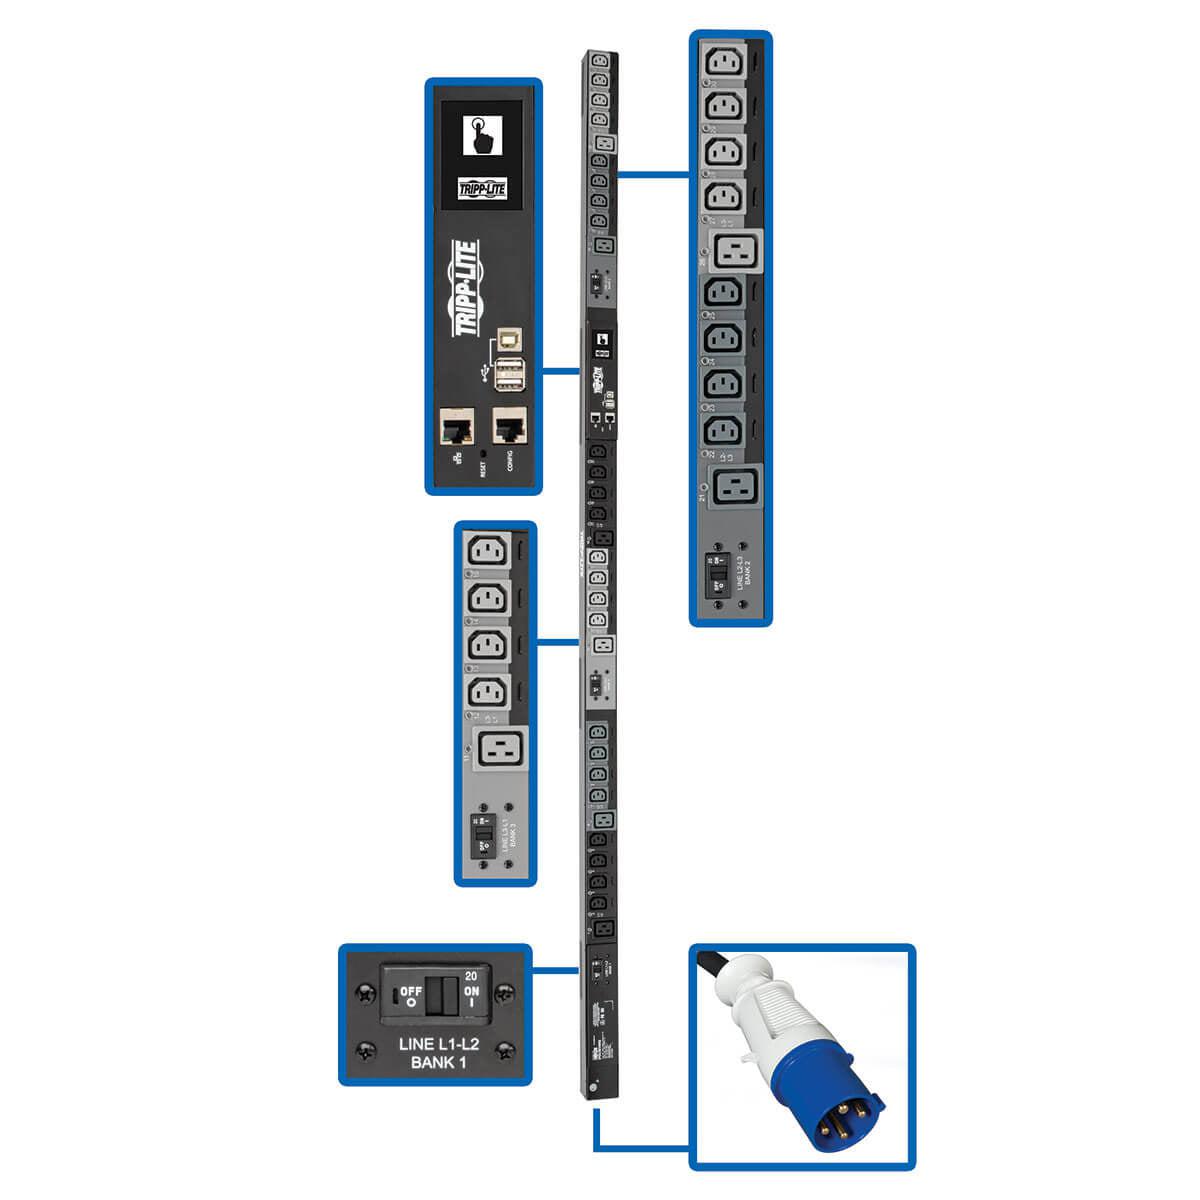 Tripp Lite 10Kw 3-Phase Switched Pdu, Lx Interface, 200/208/240V Outlets (24 C13/6 C19), Lcd, Iec